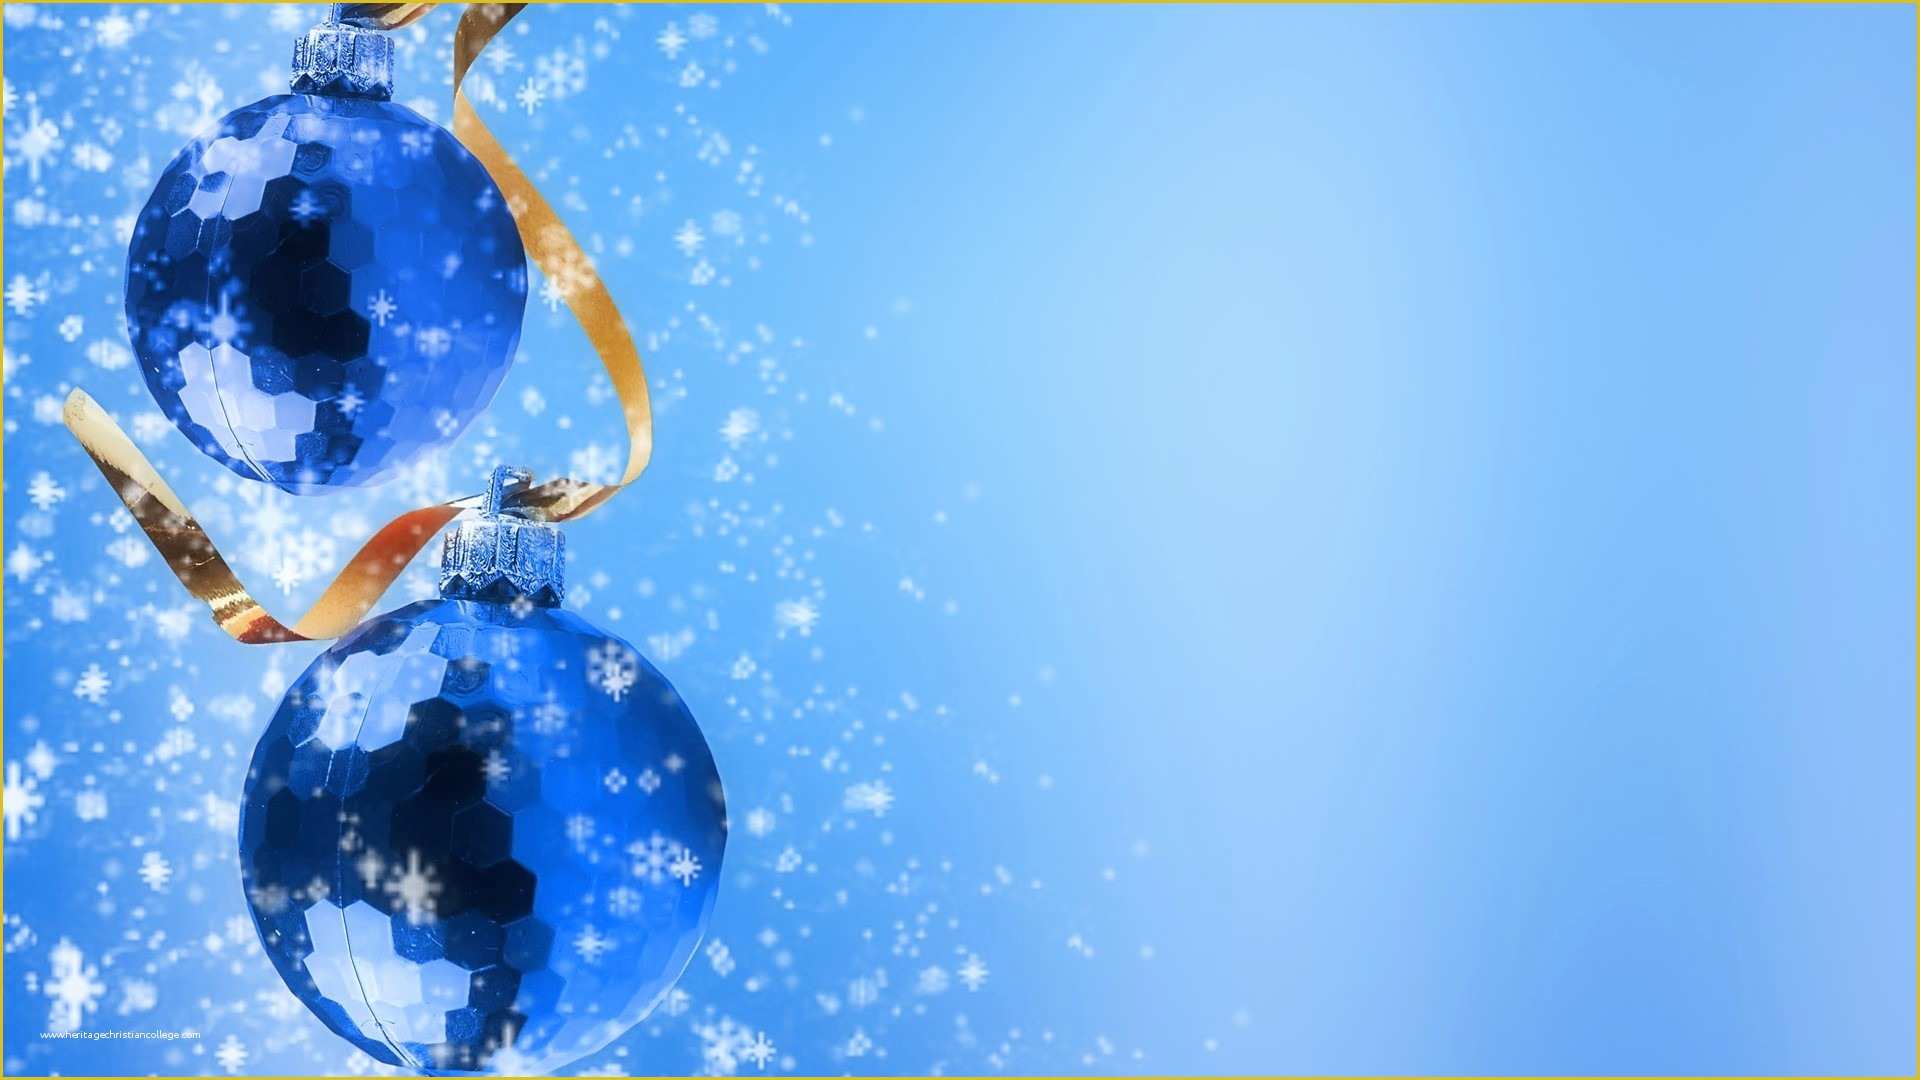 Free Christmas Powerpoint Templates Of 25 Christmas Powerpoint Backgrounds ·① Download Free